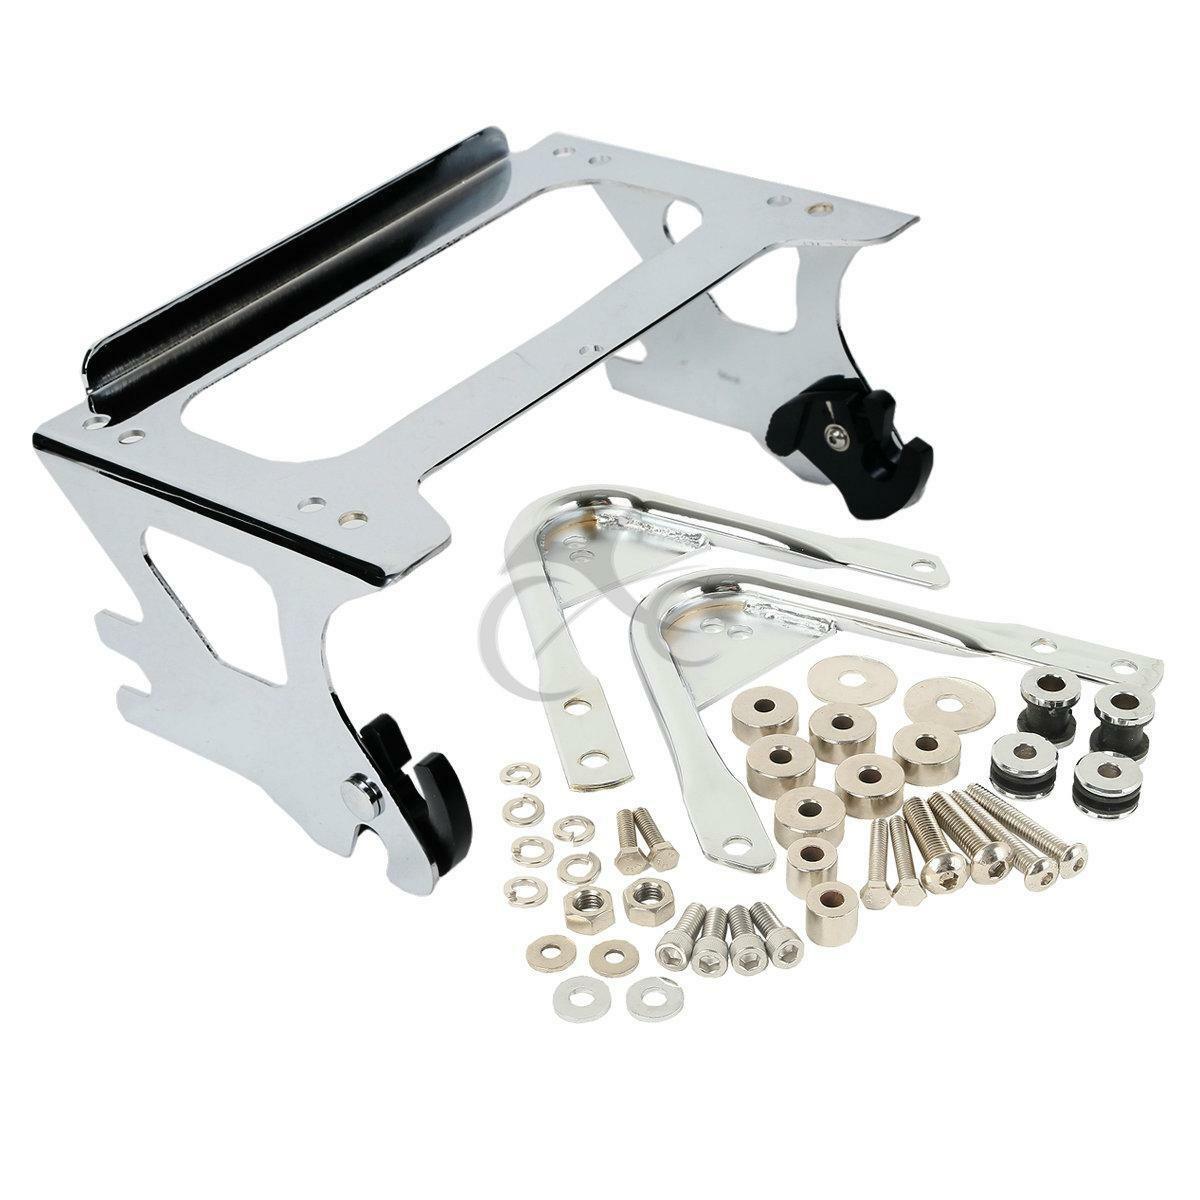 Pack Luggage Rack & Docking Hardware Fit For Harley Tour Pak Touring Glide 97-08 - Moto Life Products